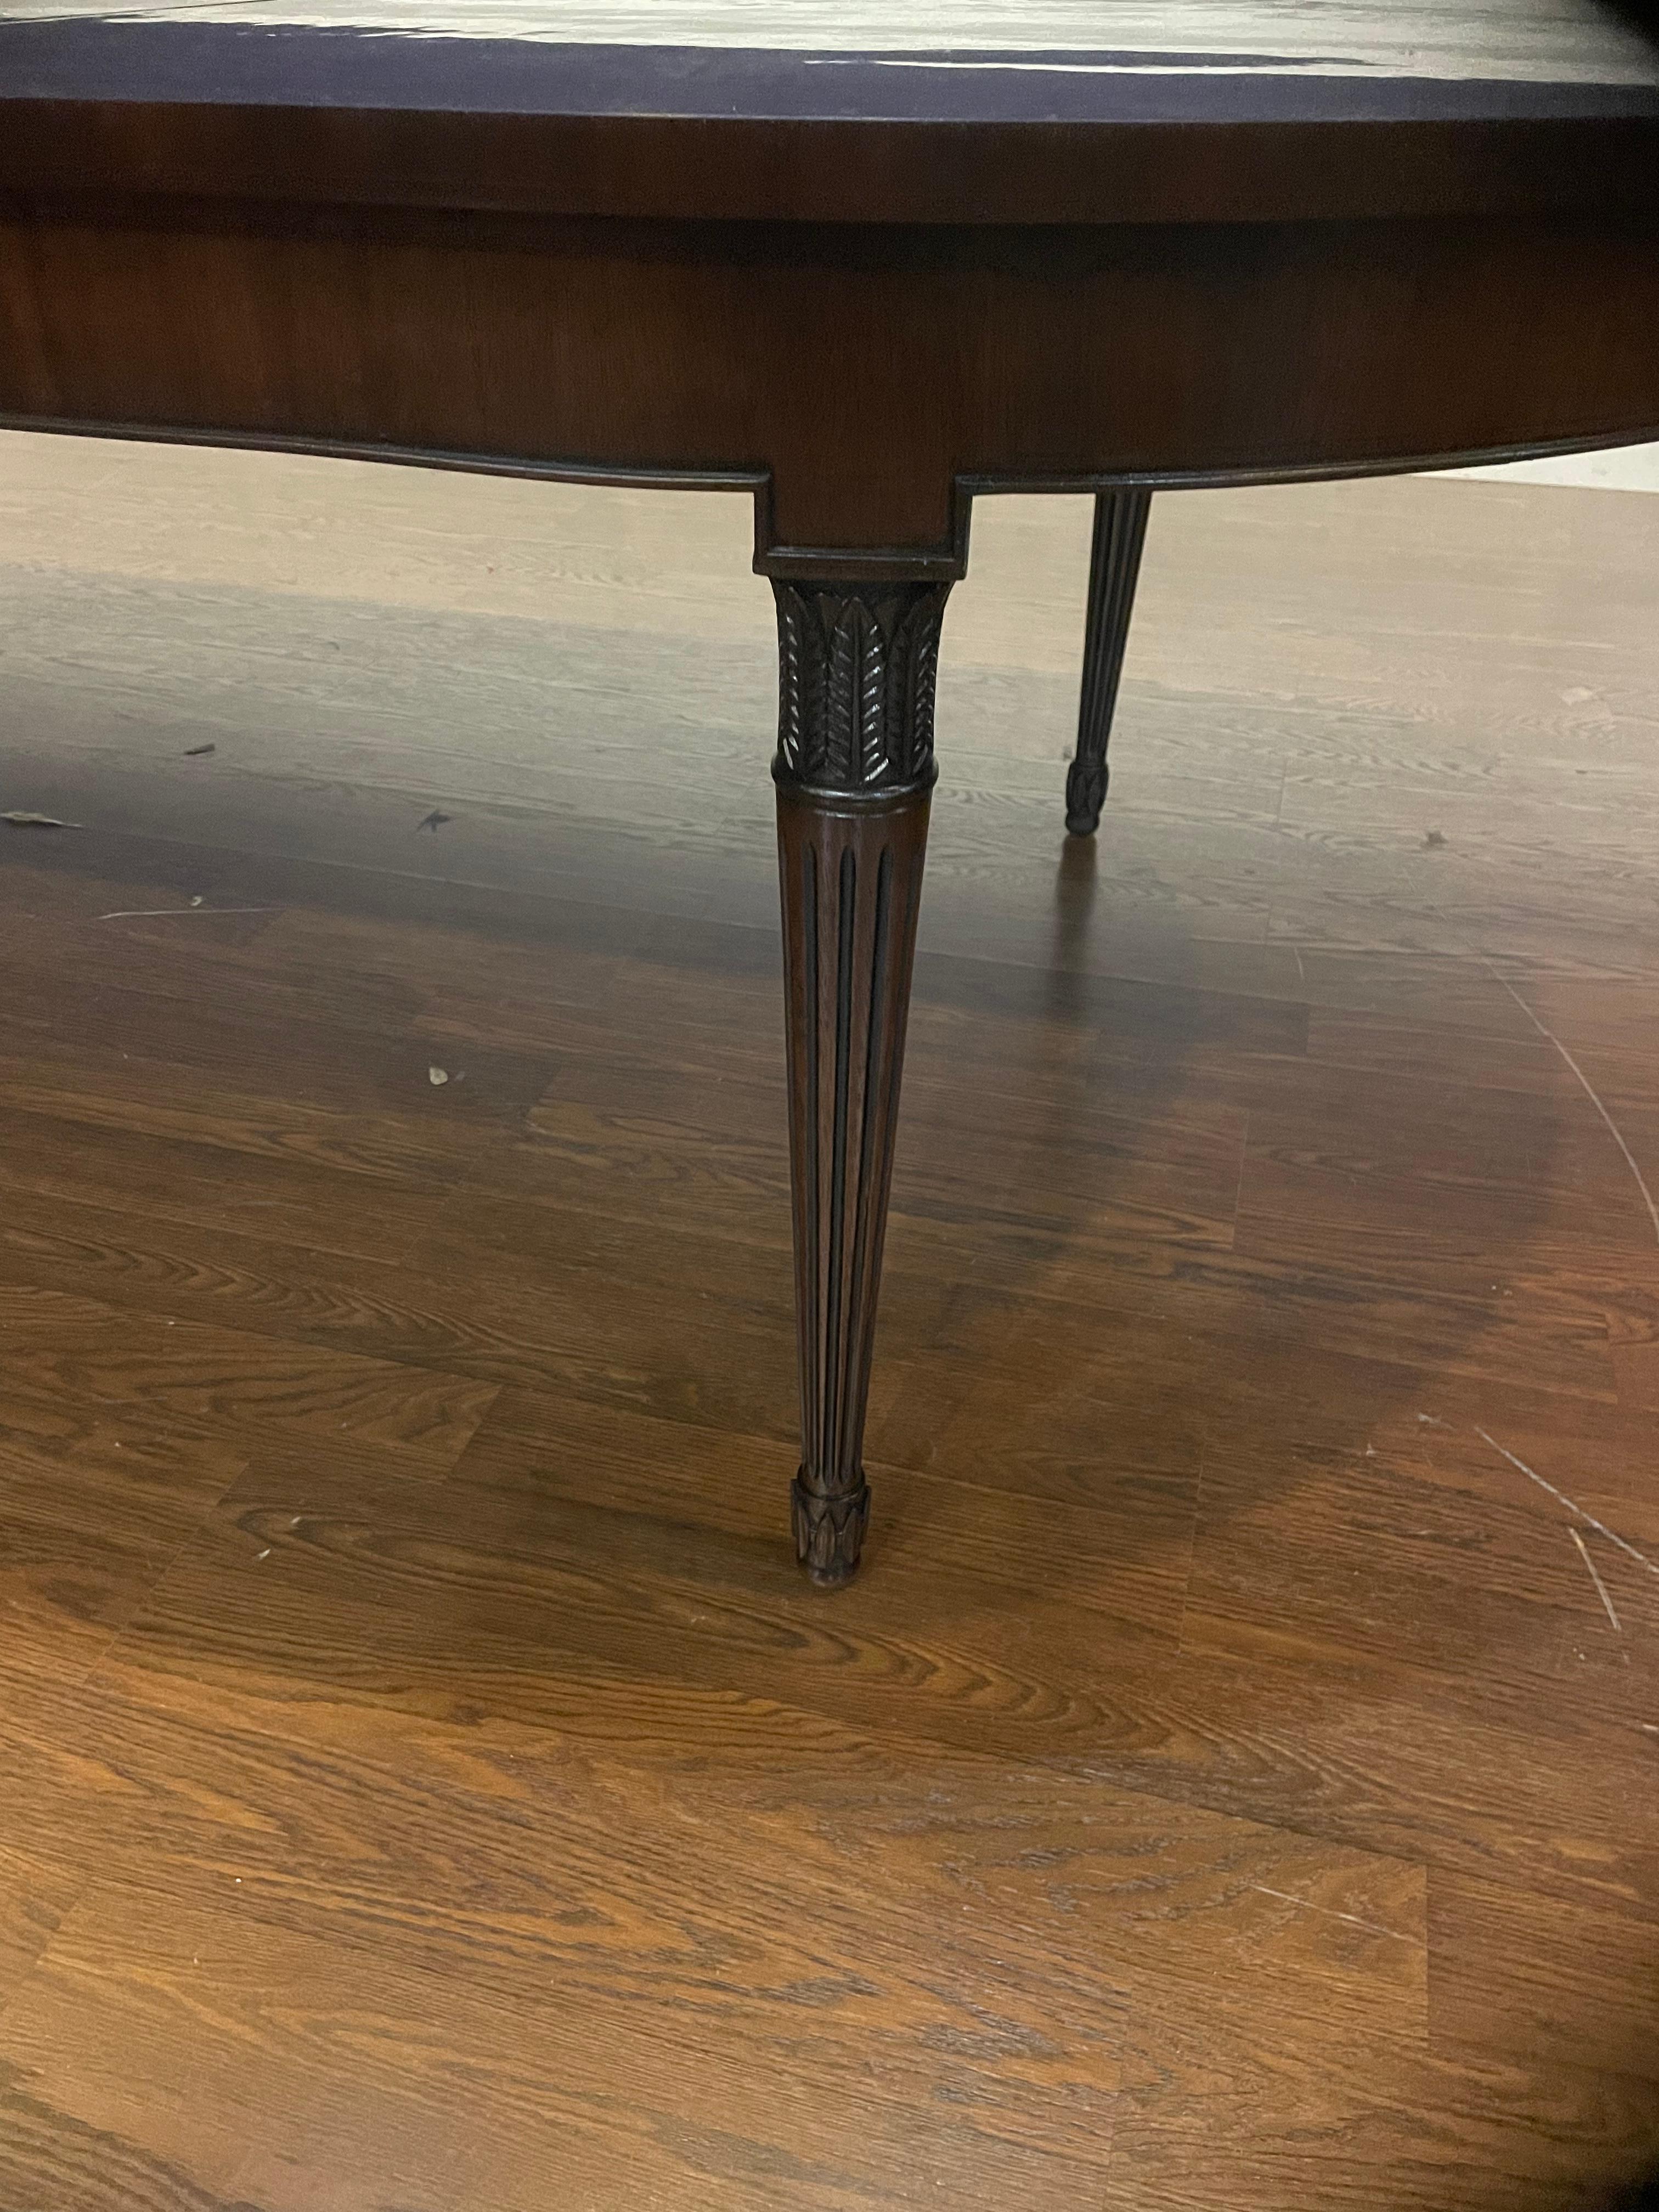 Sheraton Style Oval Mahogany Four Leg Dining Table In New Condition For Sale In Suwanee, GA